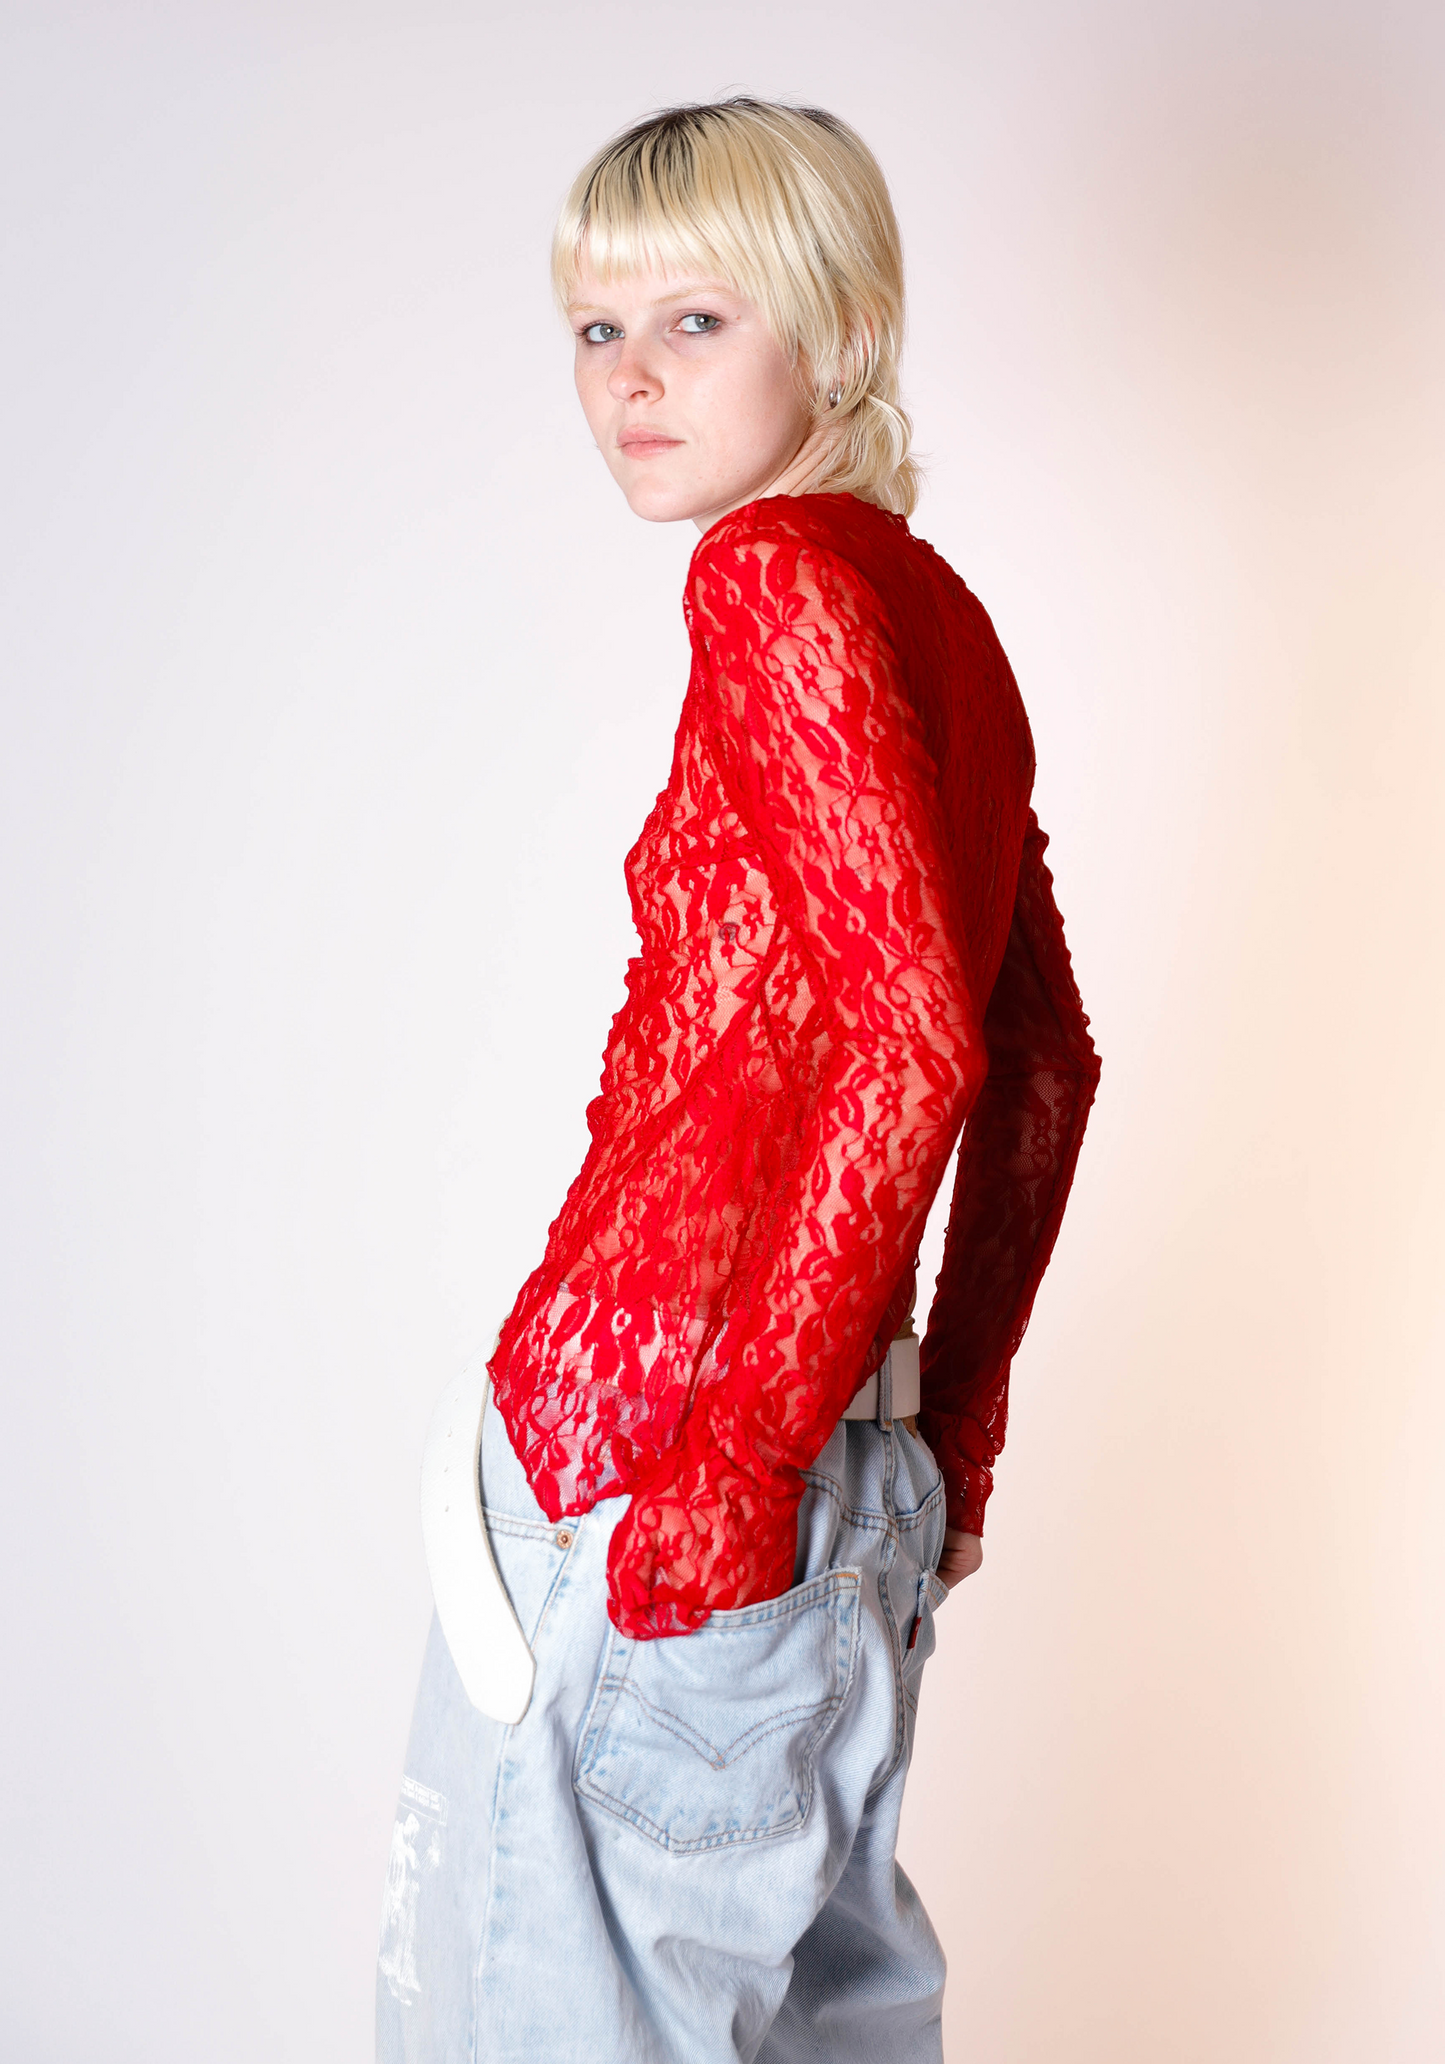 Demeter Long Sleeve Top in Cherry Lace